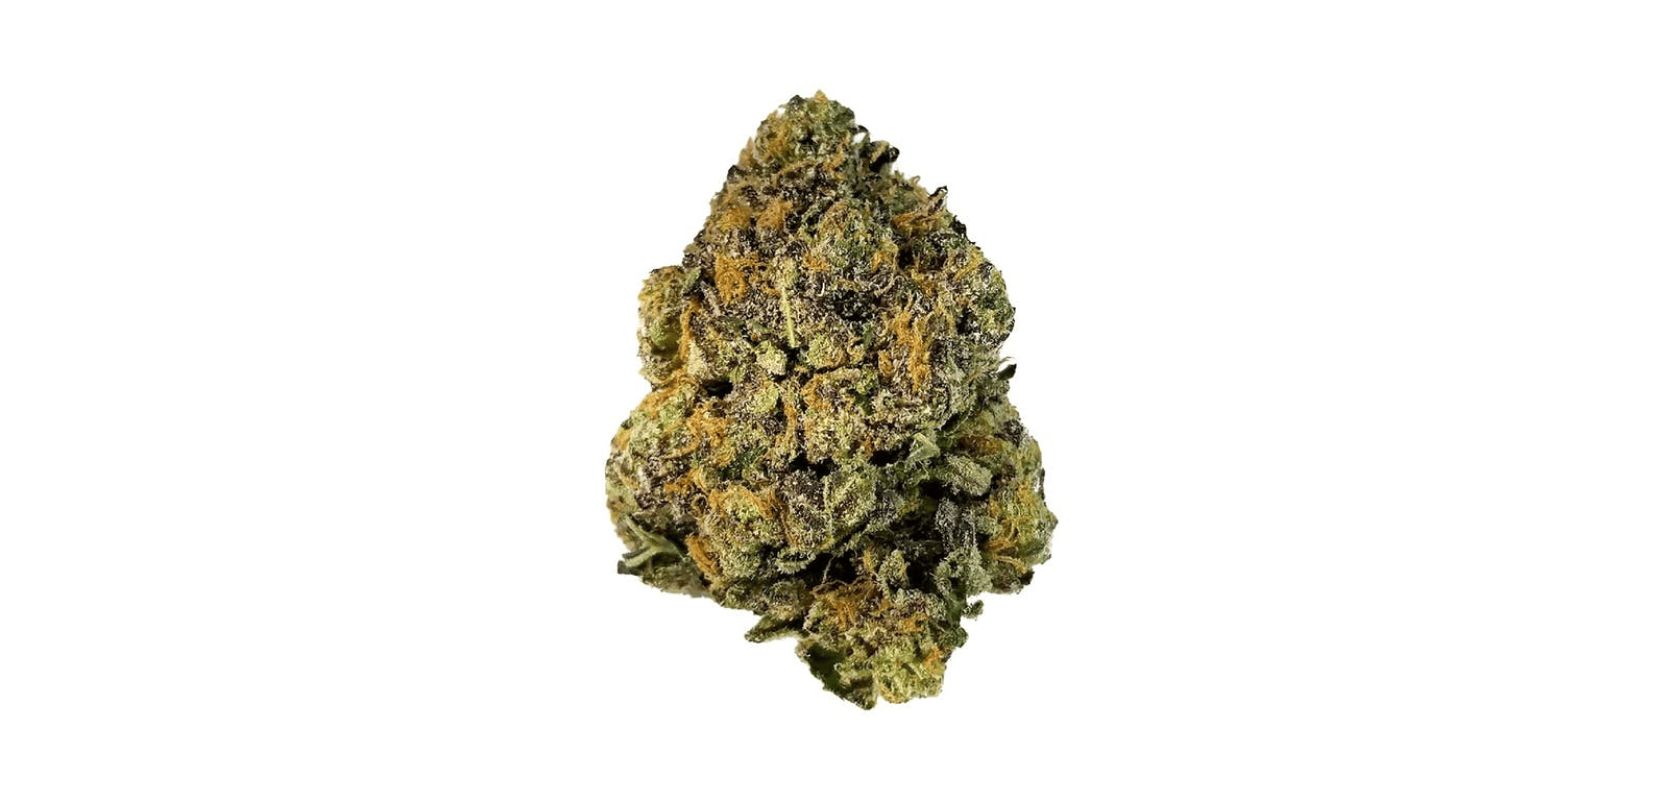 When it comes to the aroma and flavours, the Platinum Rockstar strain is an earthy and pungent bud - much like the original.